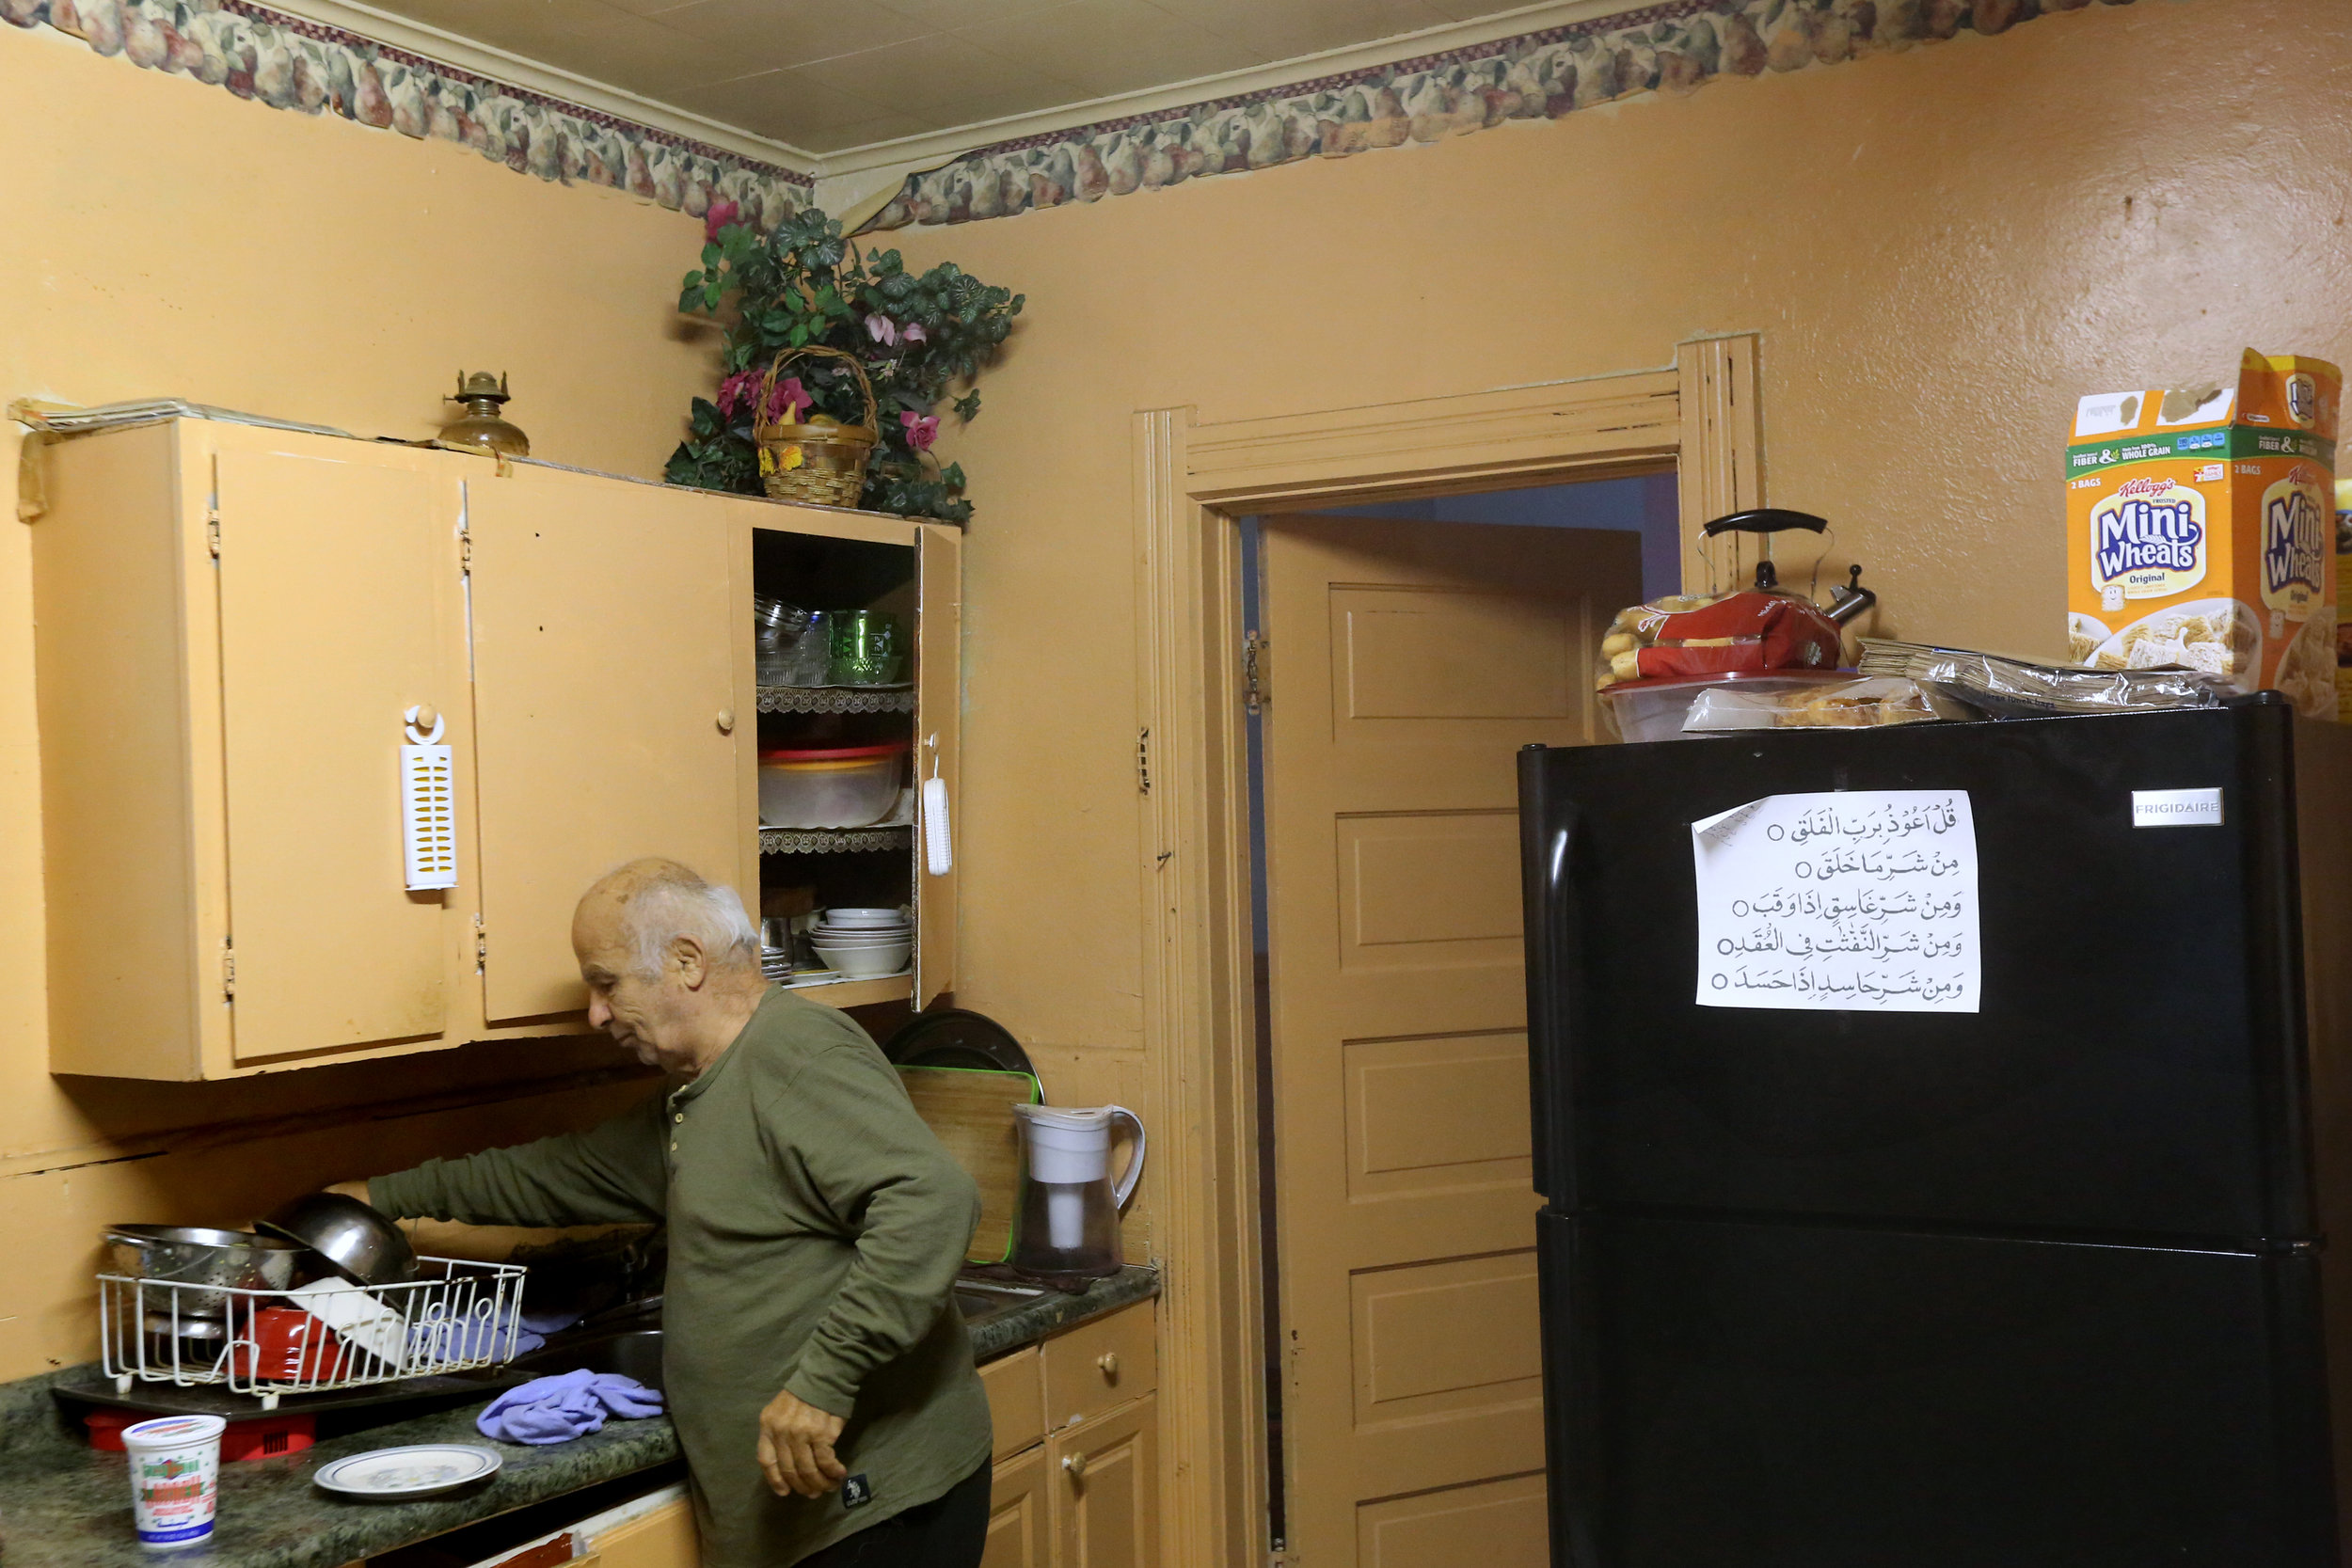  Hassan Cheaib, 81, cooks breakfast in his home in Toledo's North End. My Cheaib, who is proud to own his home outright, says the neighborhood's low cost of living is a plus. His wife, Khadije, posts Qur'anic Arabic verses throughout their house. 


